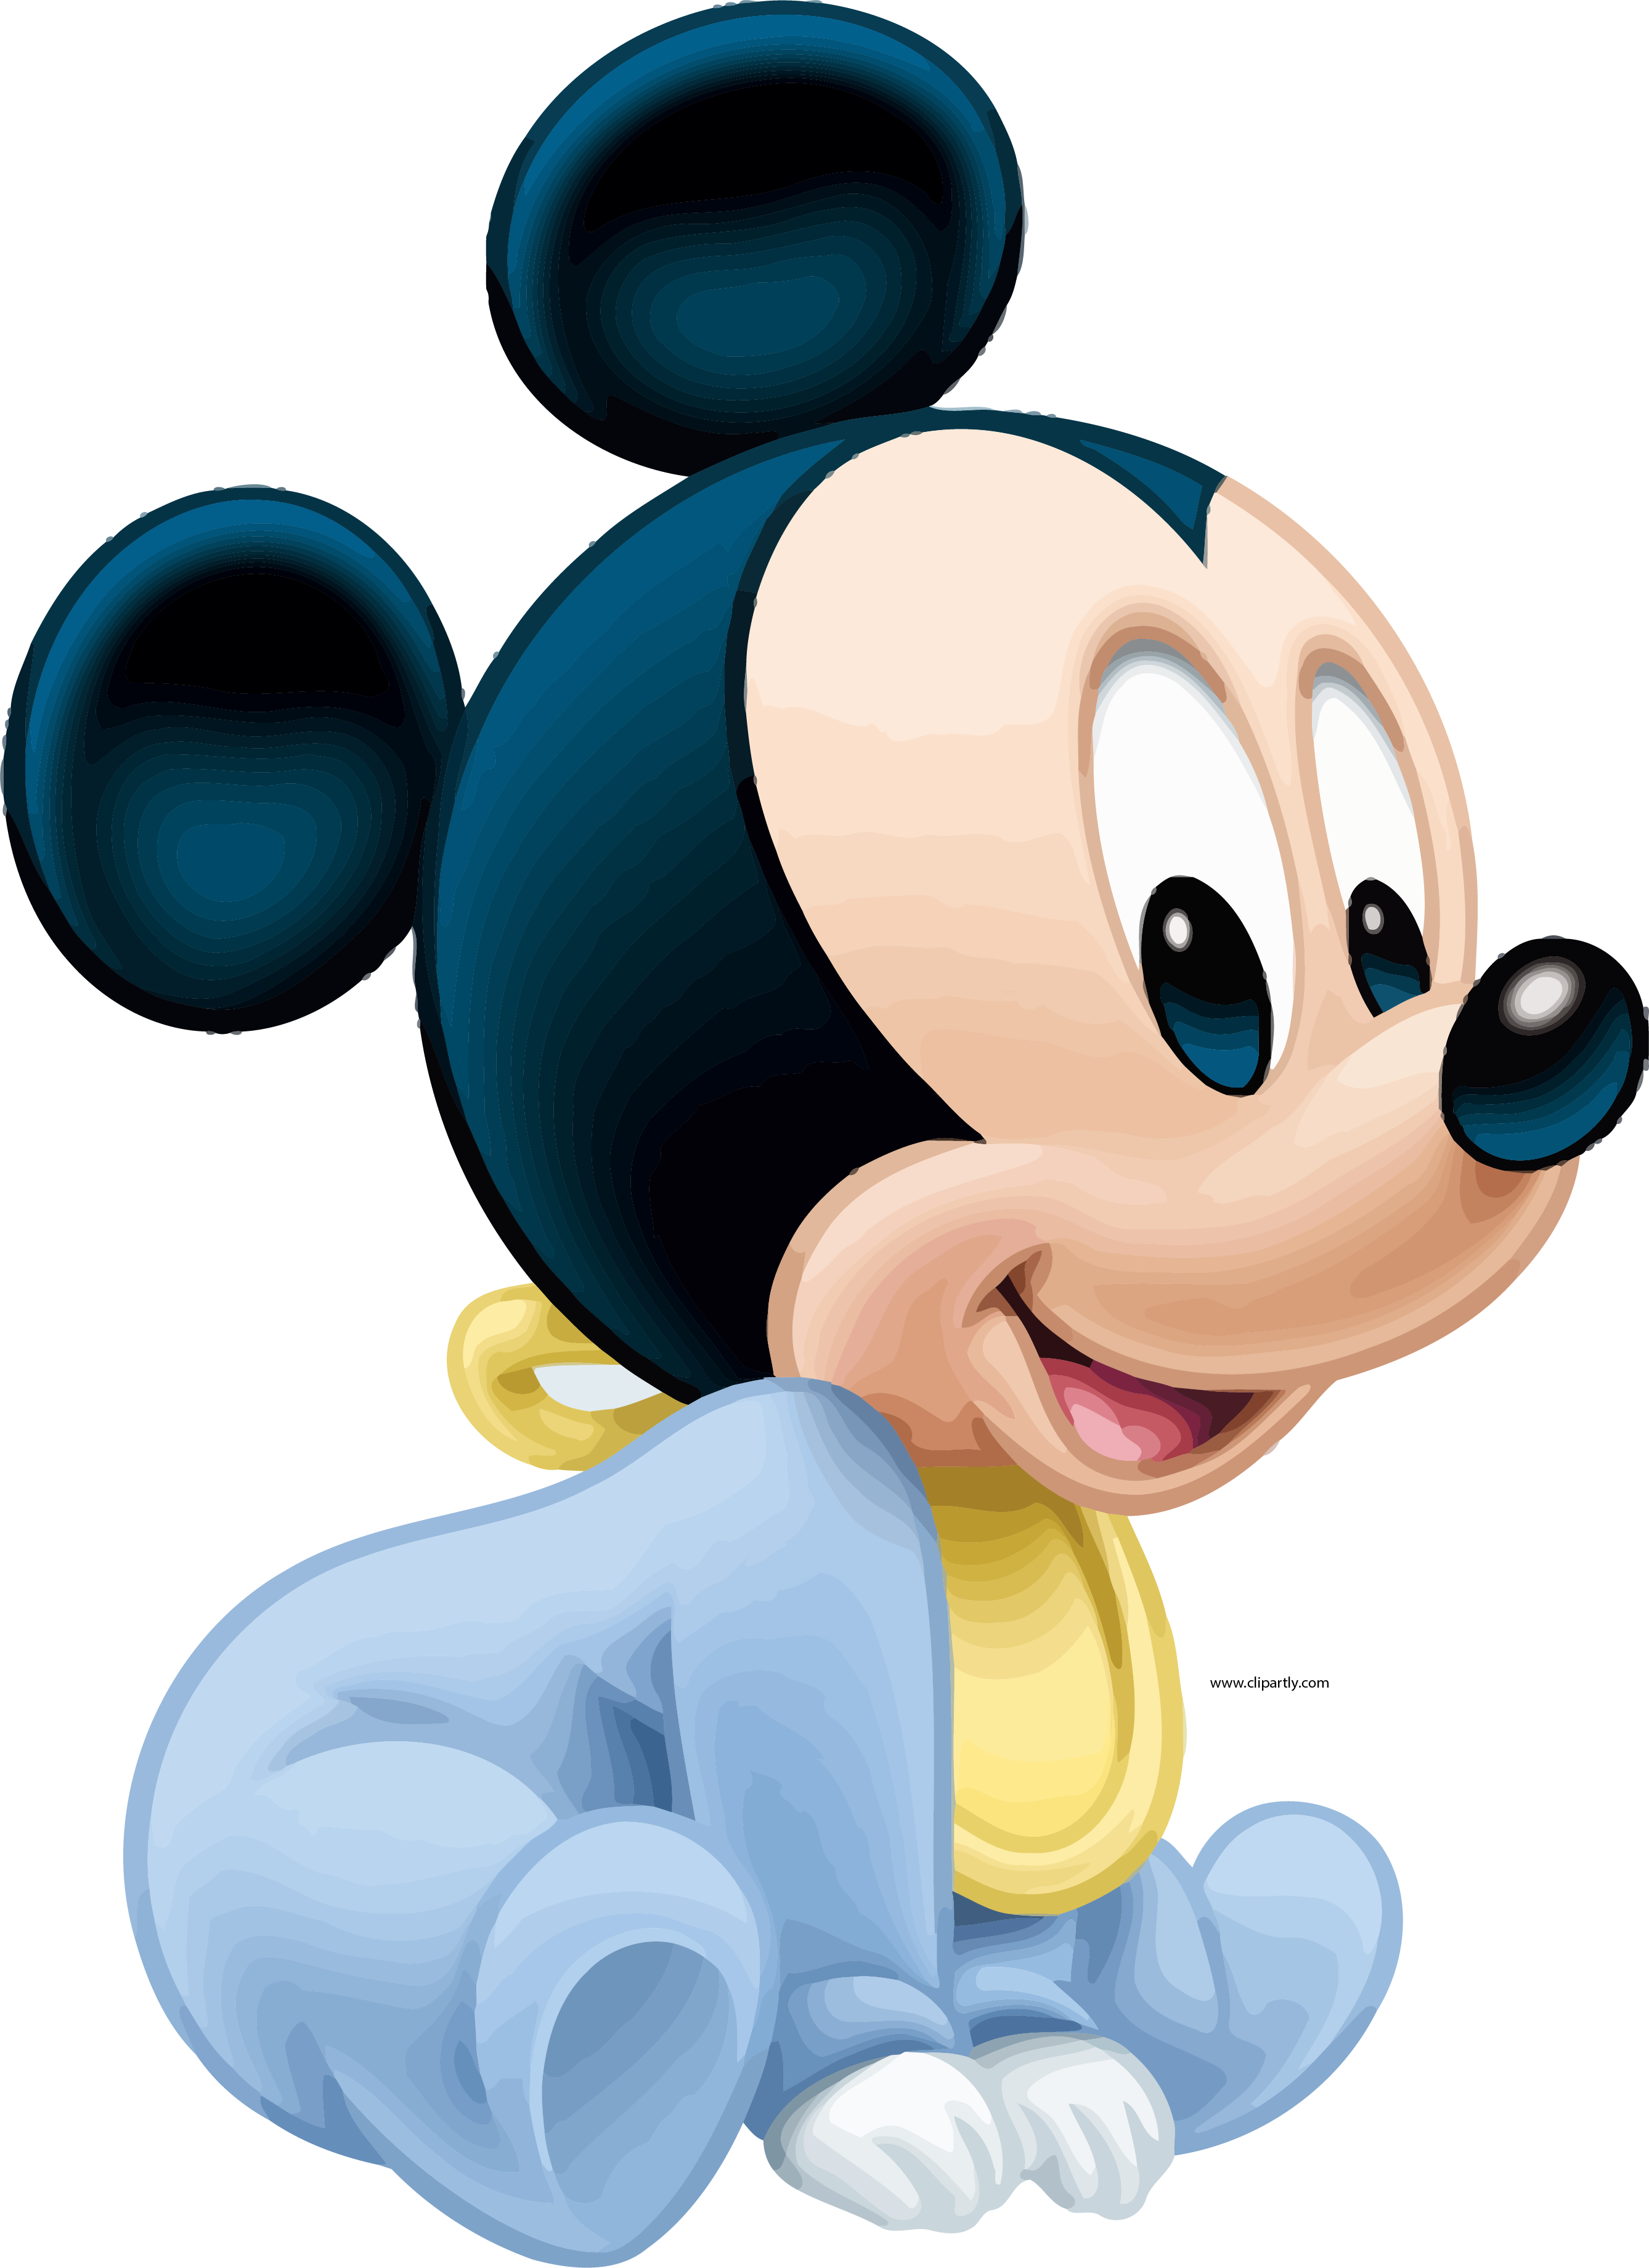 Gucci Mickey Mouse Top Free Gucci Mickey Mouse Bac iPhone Wallpapers  Free Download